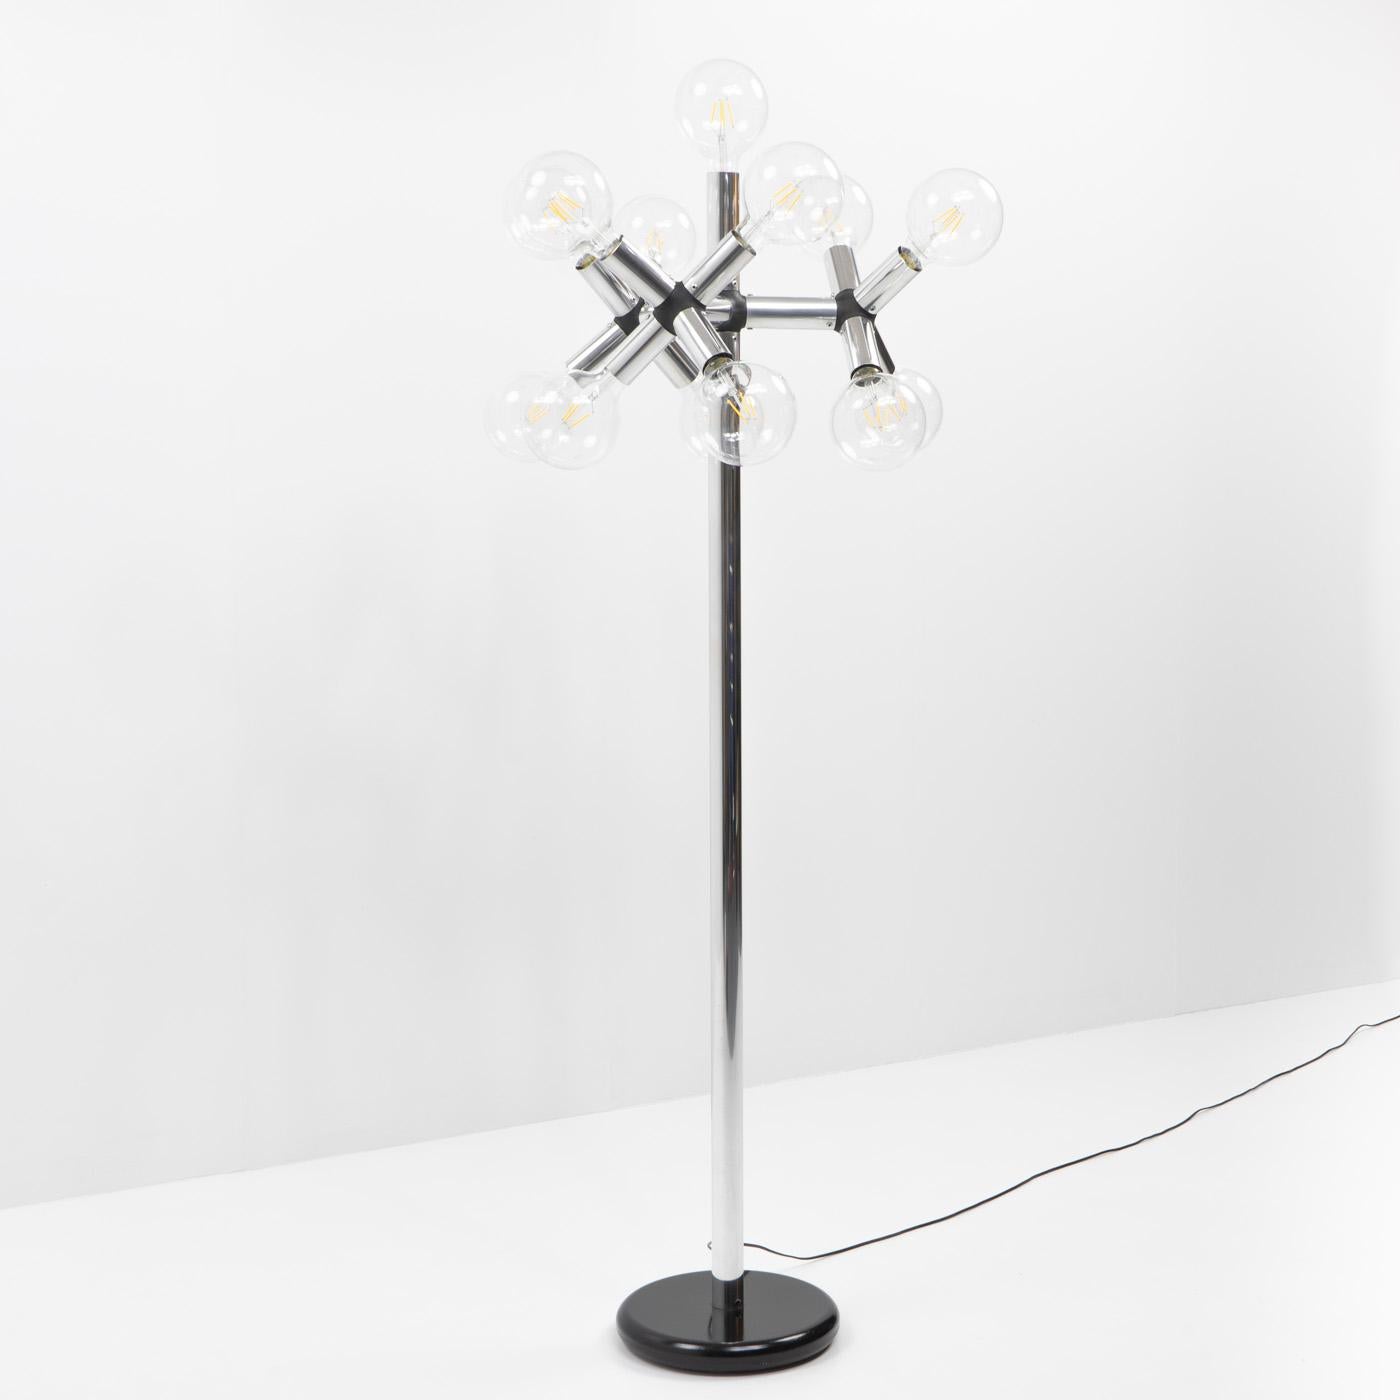 Late 20th Century Atomic Floorlamp by Haussmann for Swisslamps International, 1980s For Sale